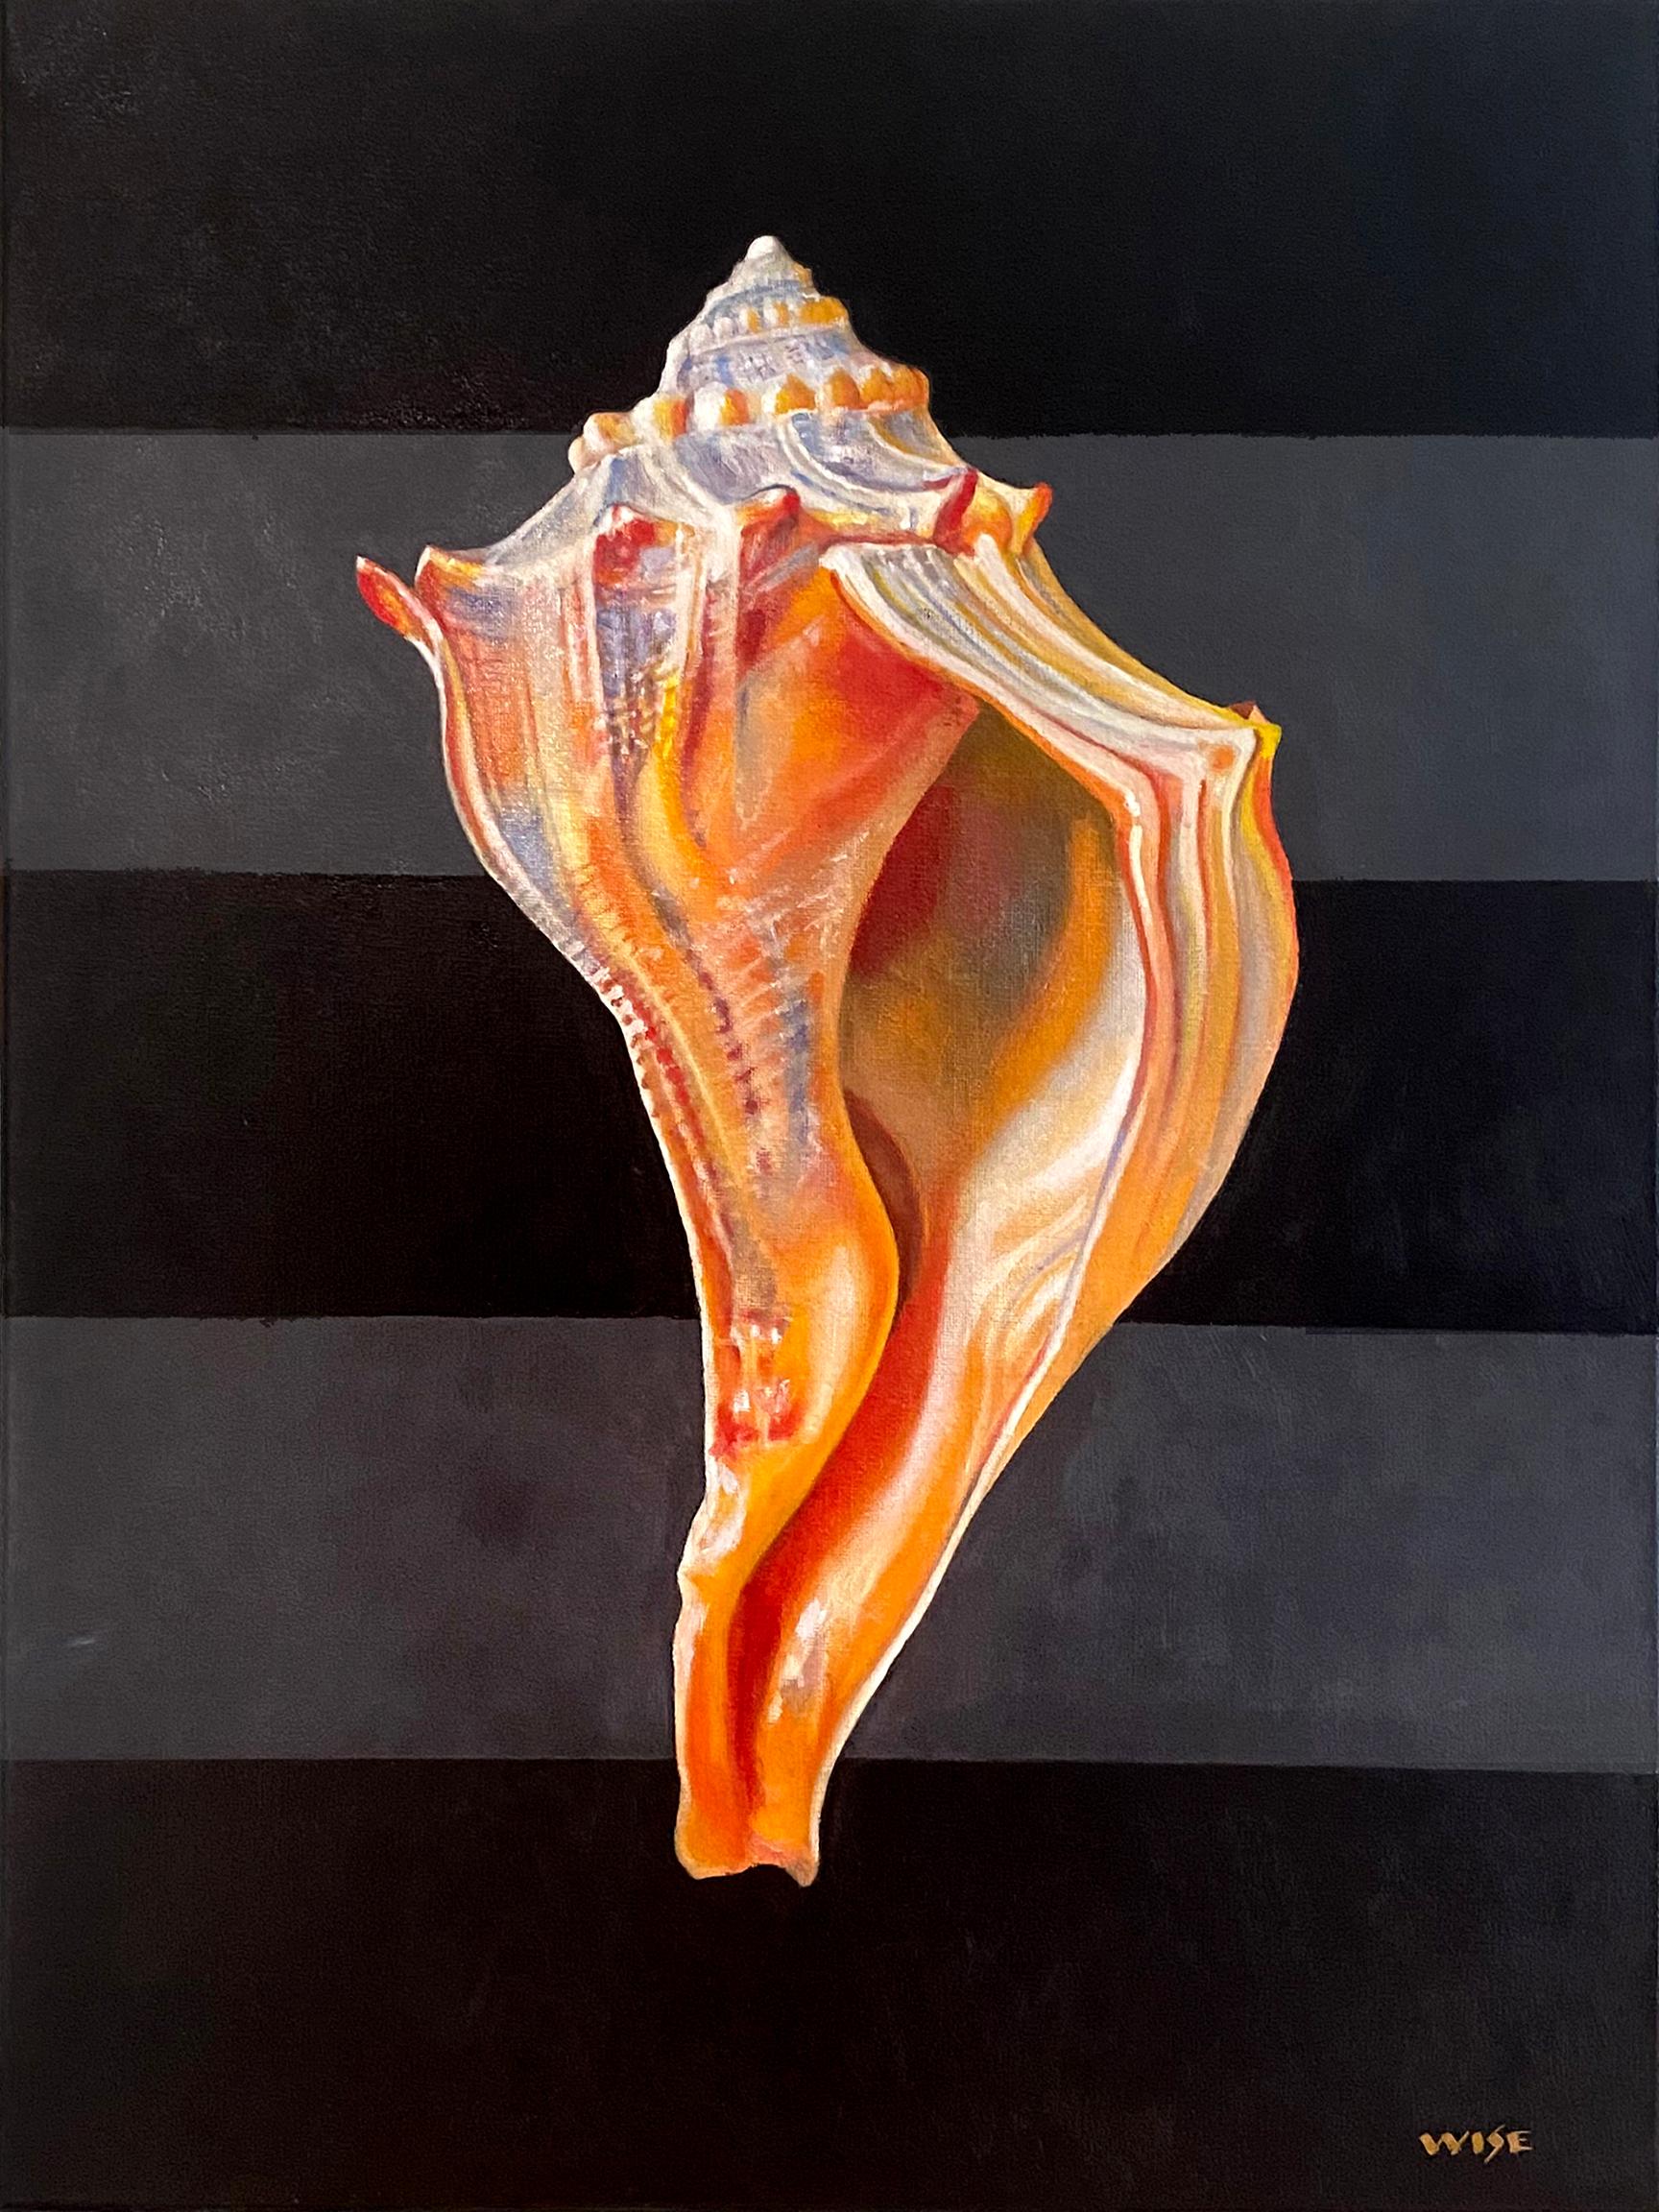 Jim Wise Still-Life Painting - "Welk" - shell painting, still life, realism - Georgia O'Keeffe